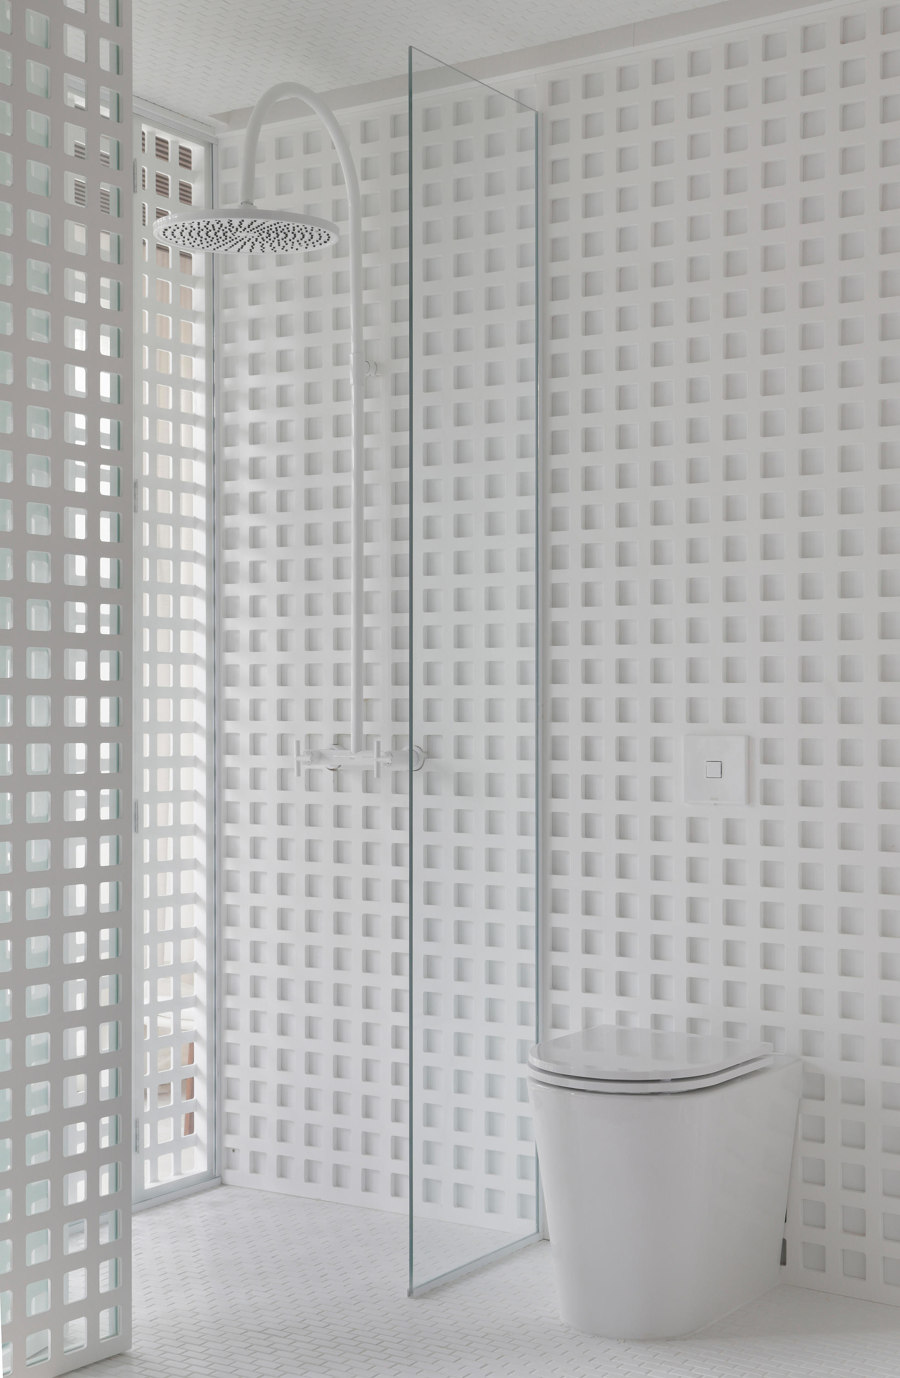 Ablution solutions: residential bathrooms up the design ante | Novità